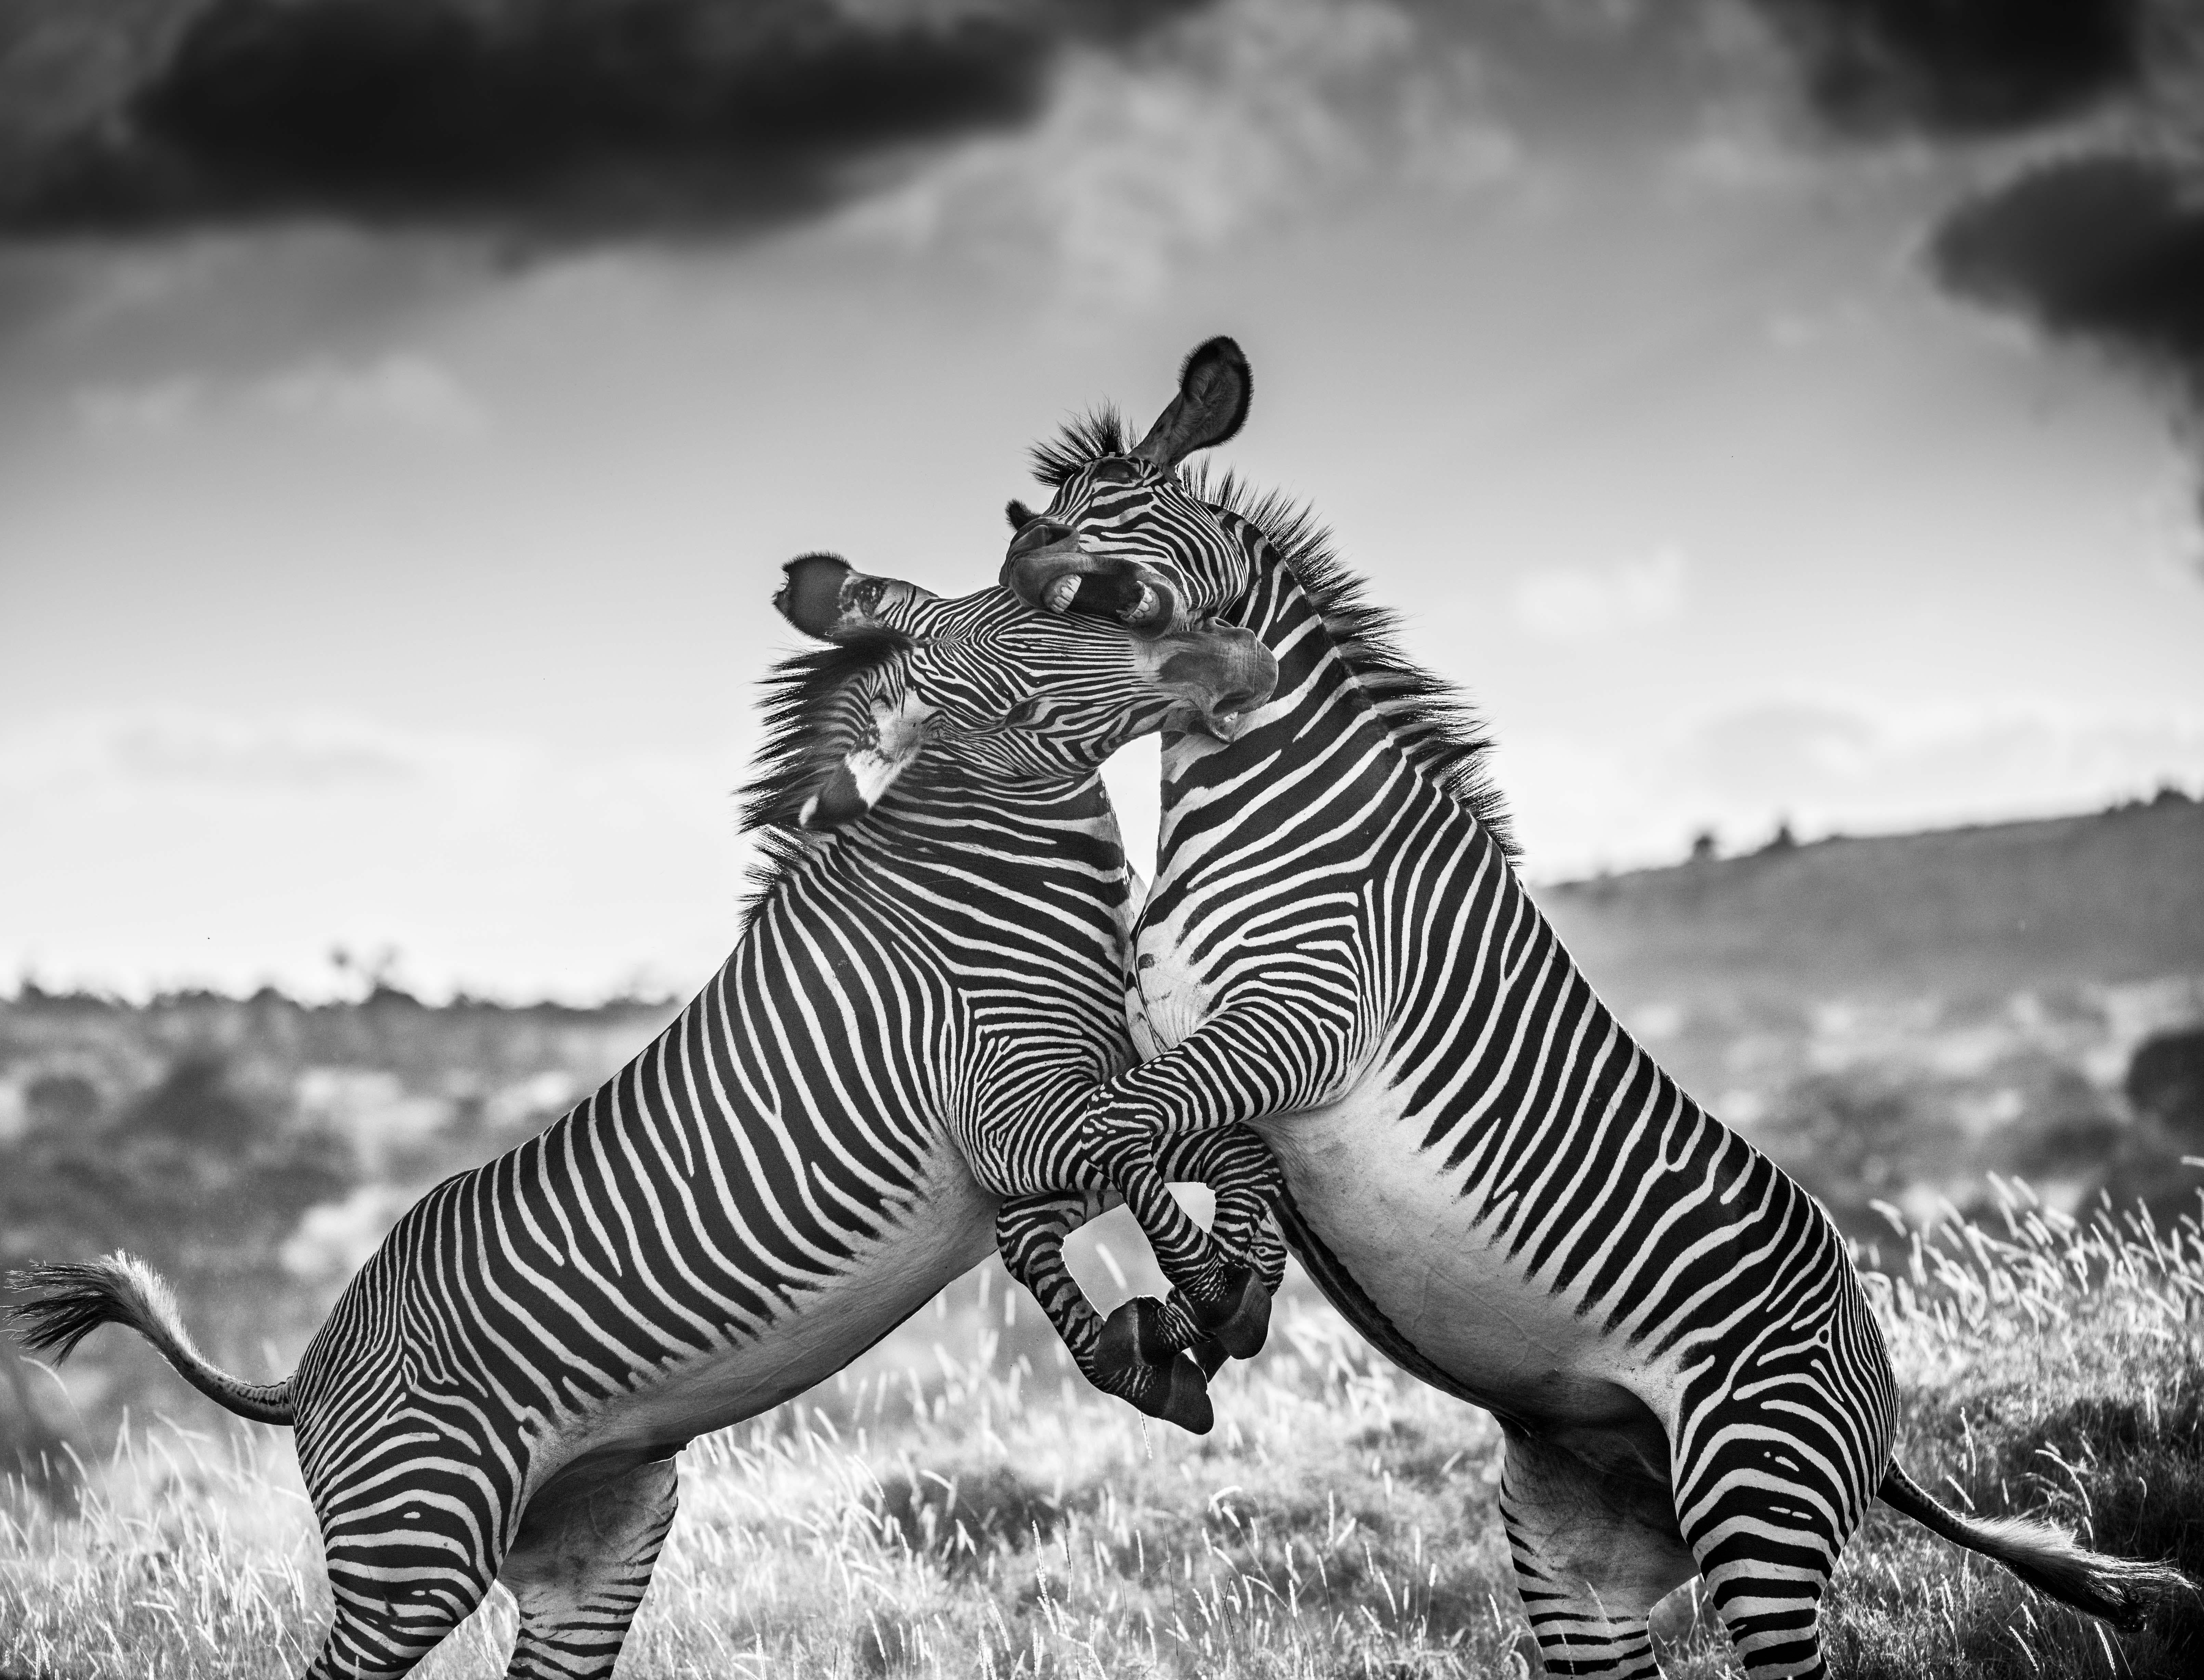 "Almost exactly a year after I took one of my strongest images, “Drought” I found my lens once again pointed in the direction of two fighting zebras. There are clear similarities and differences between the two. The obvious similarity is that both